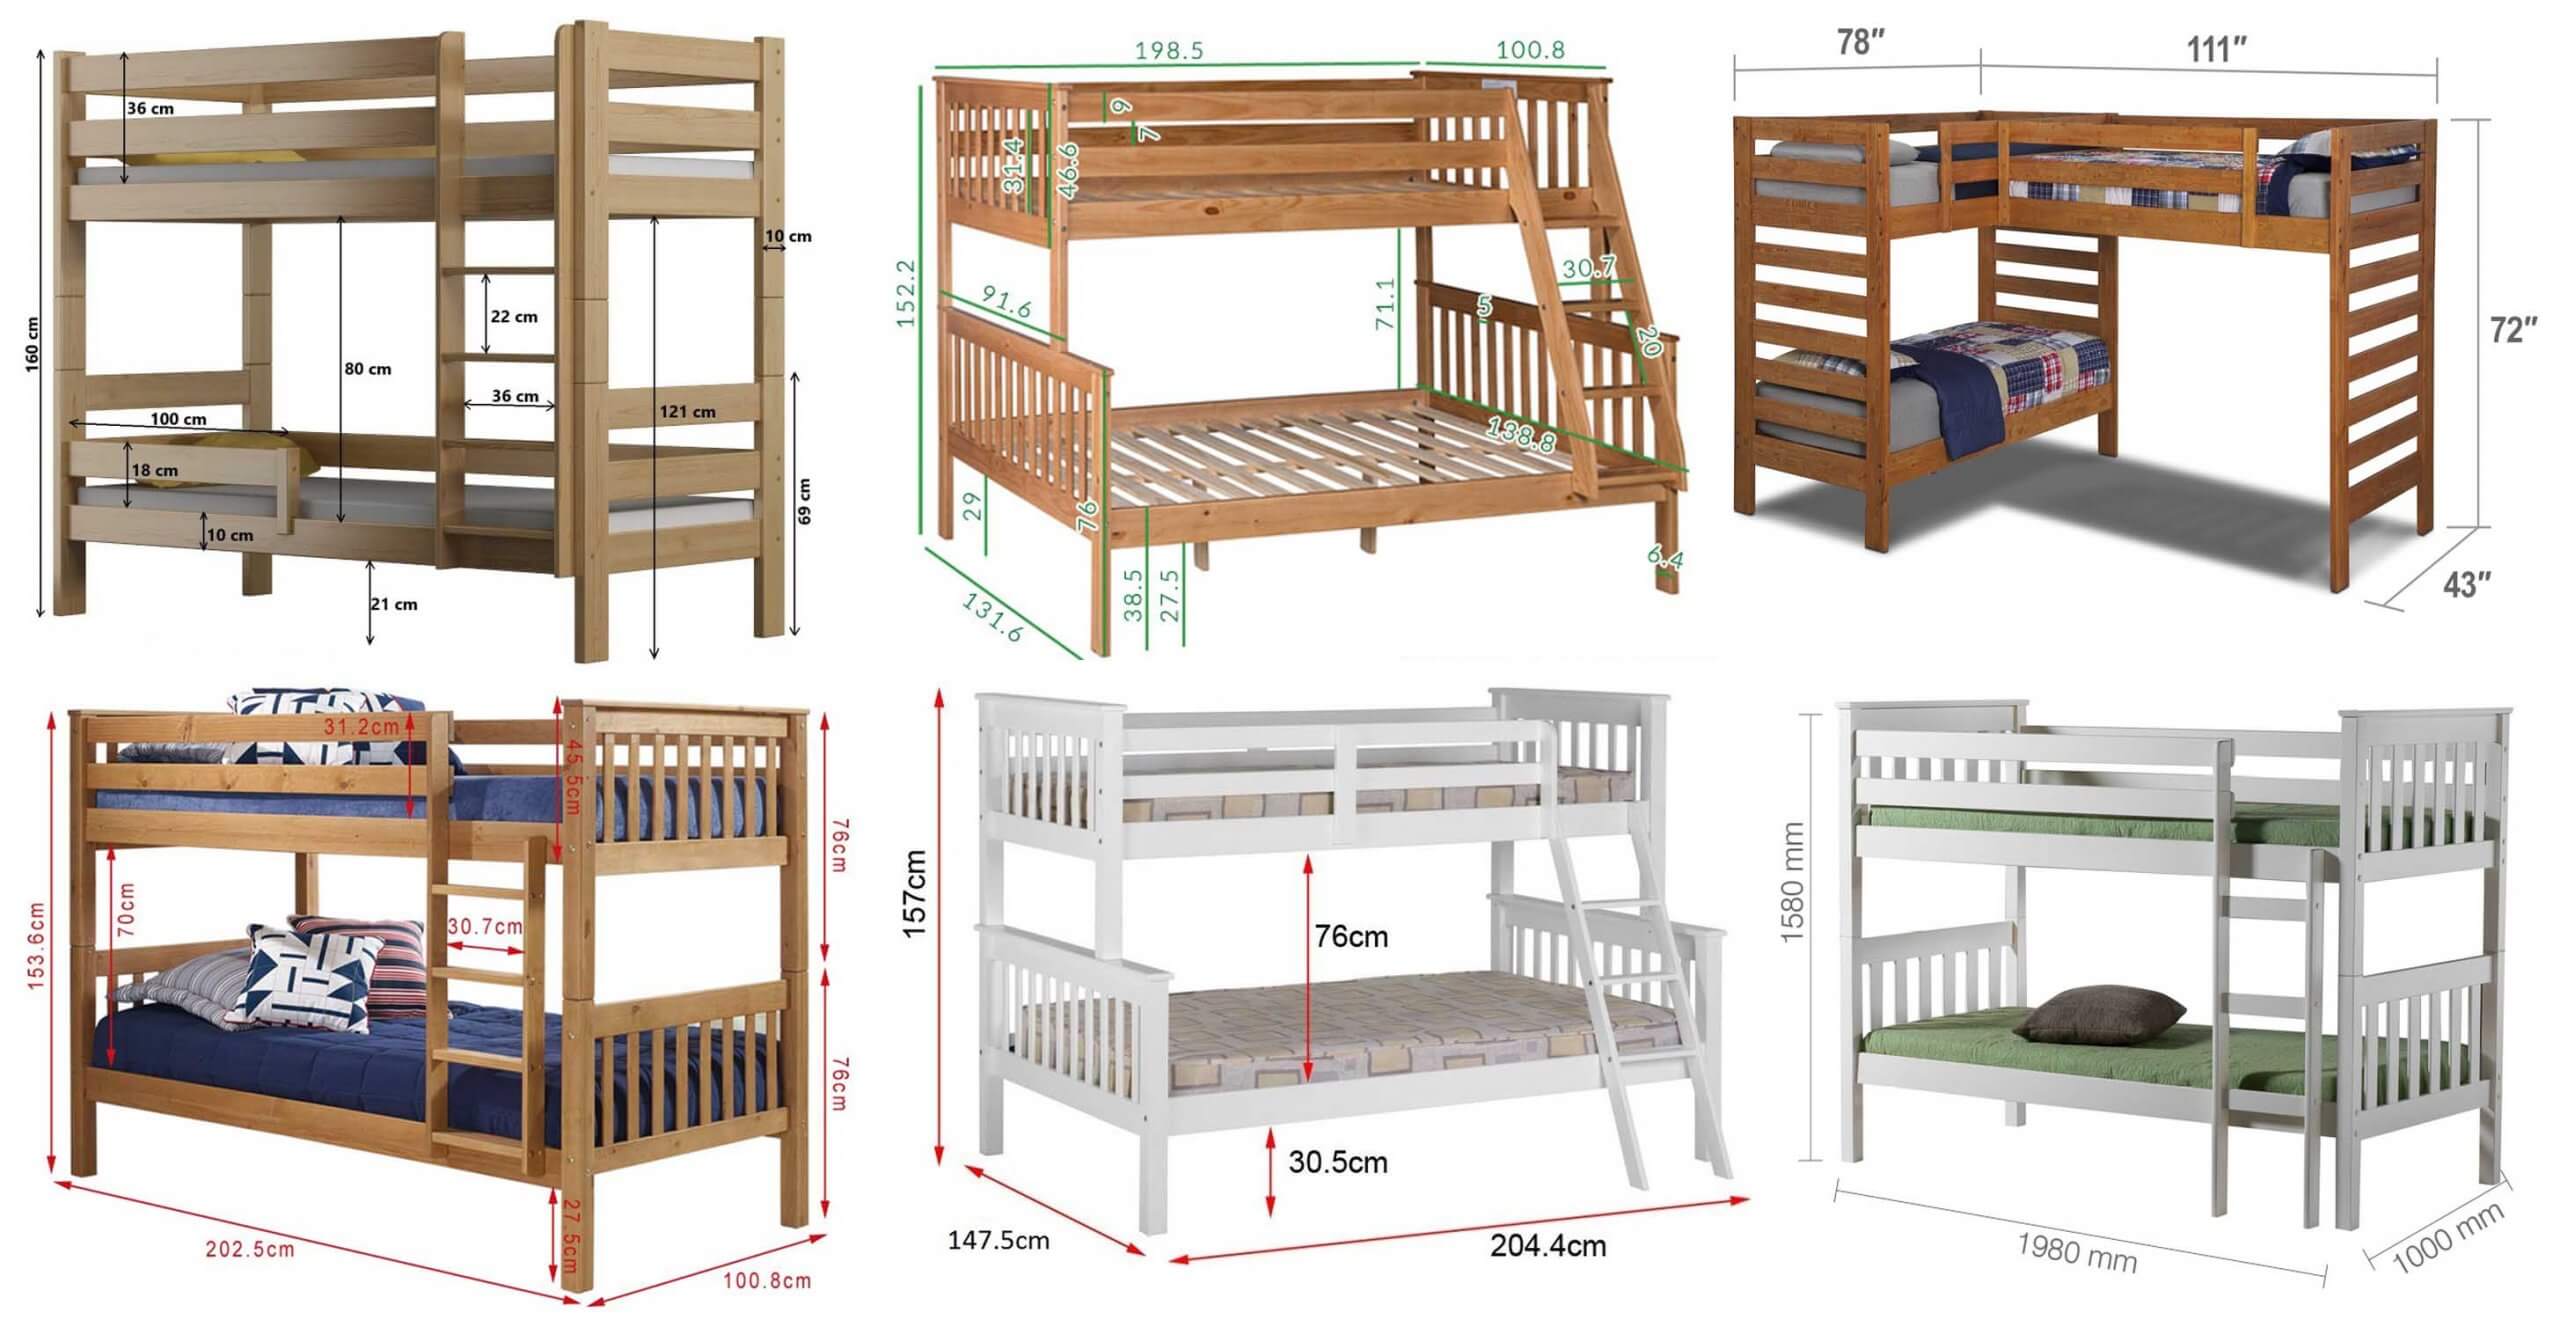 Bunk Bed Standard Dimensions - Image to u